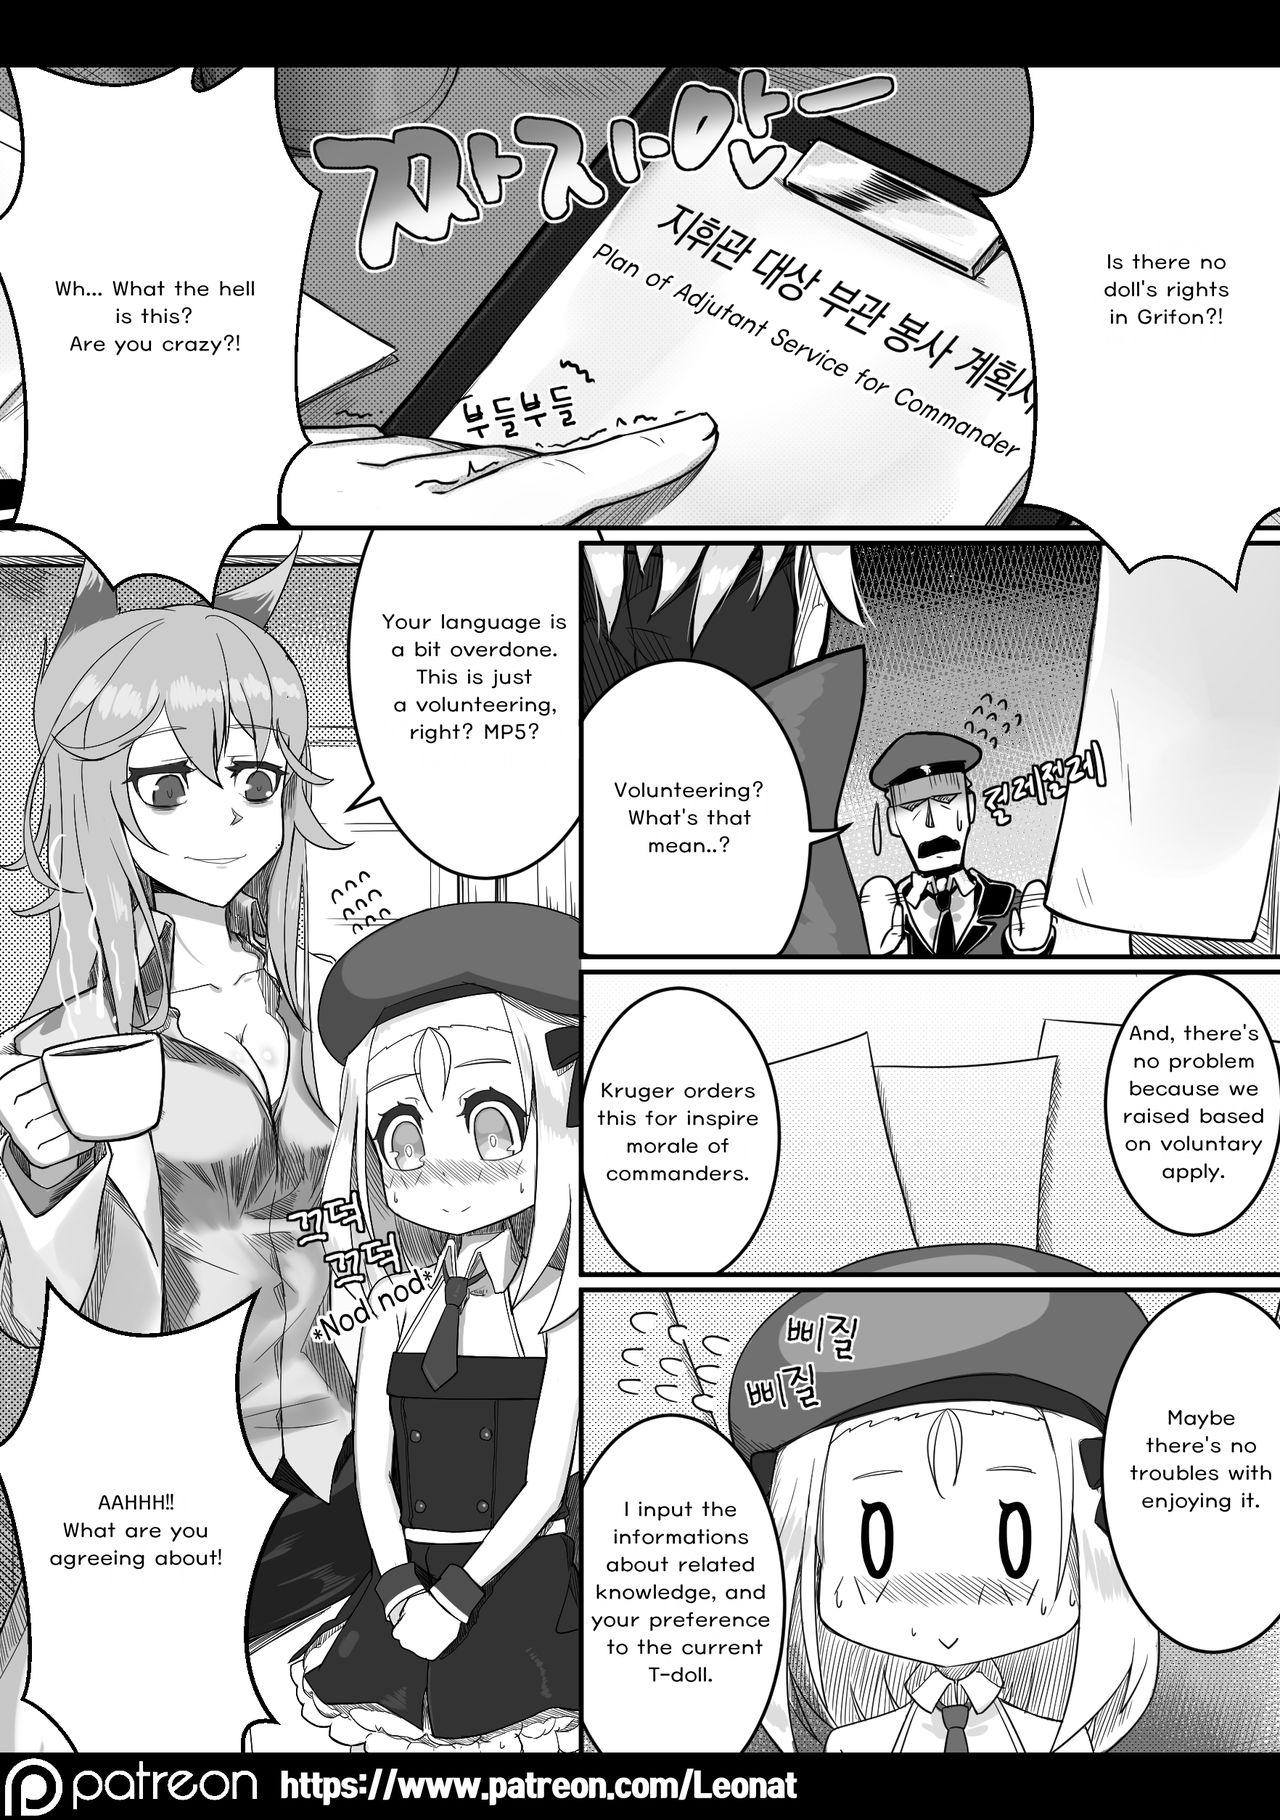 Slapping Lounge of HQ vol.2 - Girls frontline Tight Pussy Porn - Page 6